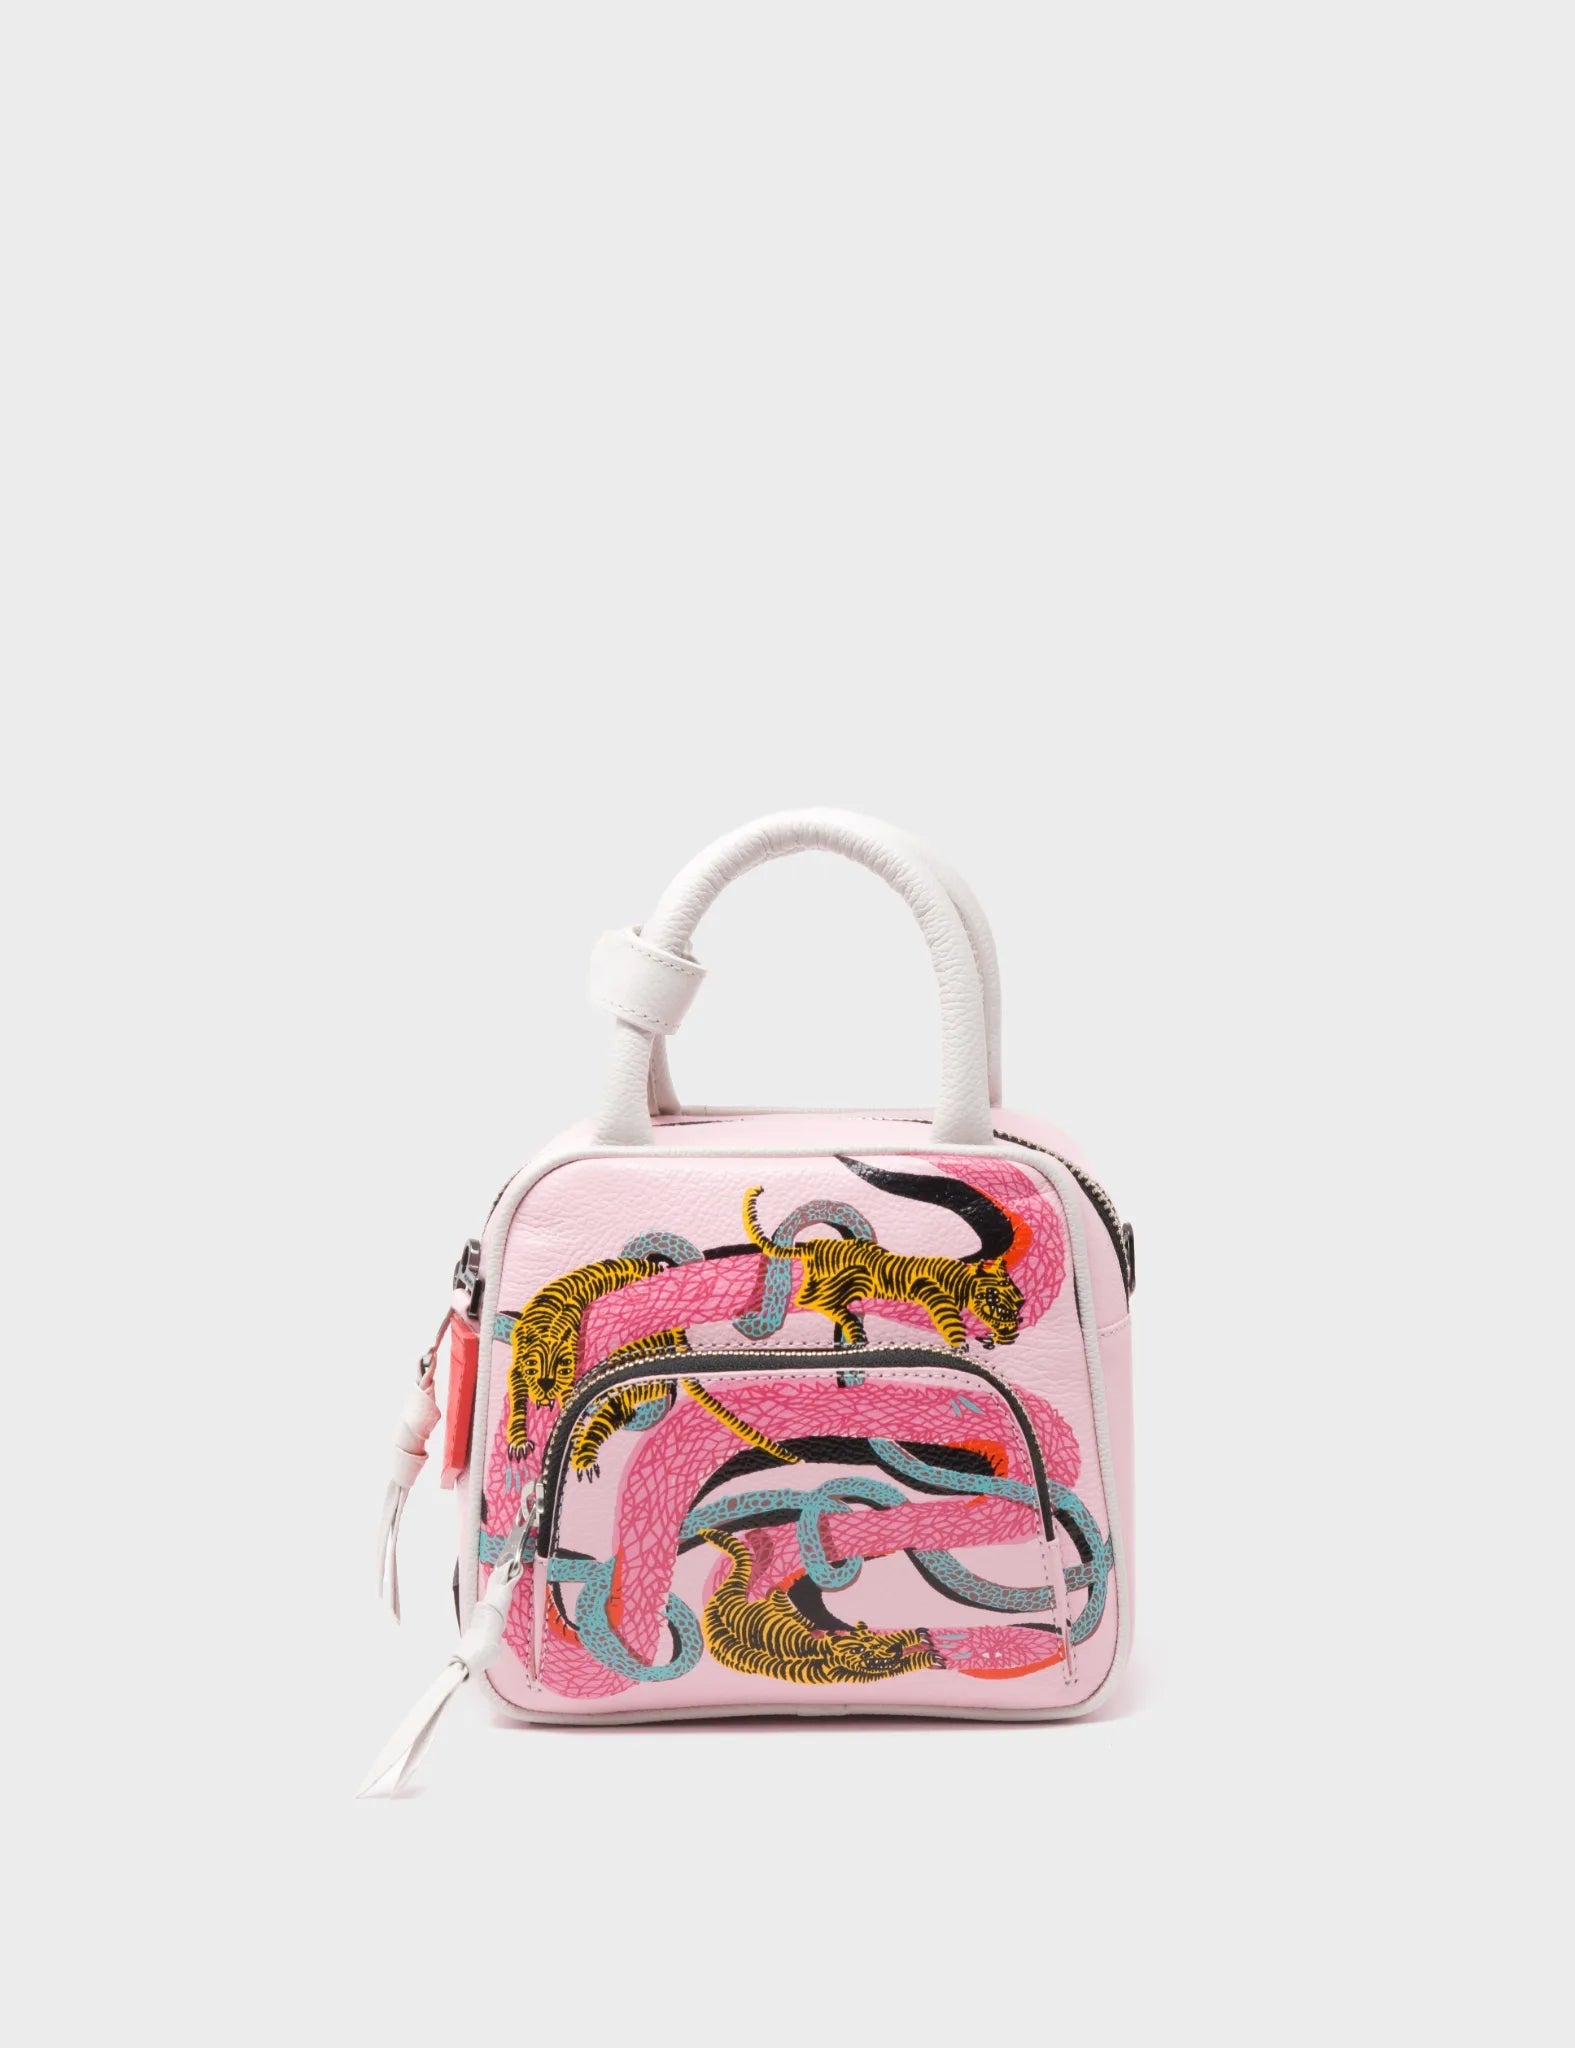 Small Crossbody Parfait Pink Leather Bag - Tangled Tiger & Snake Print Design - Front